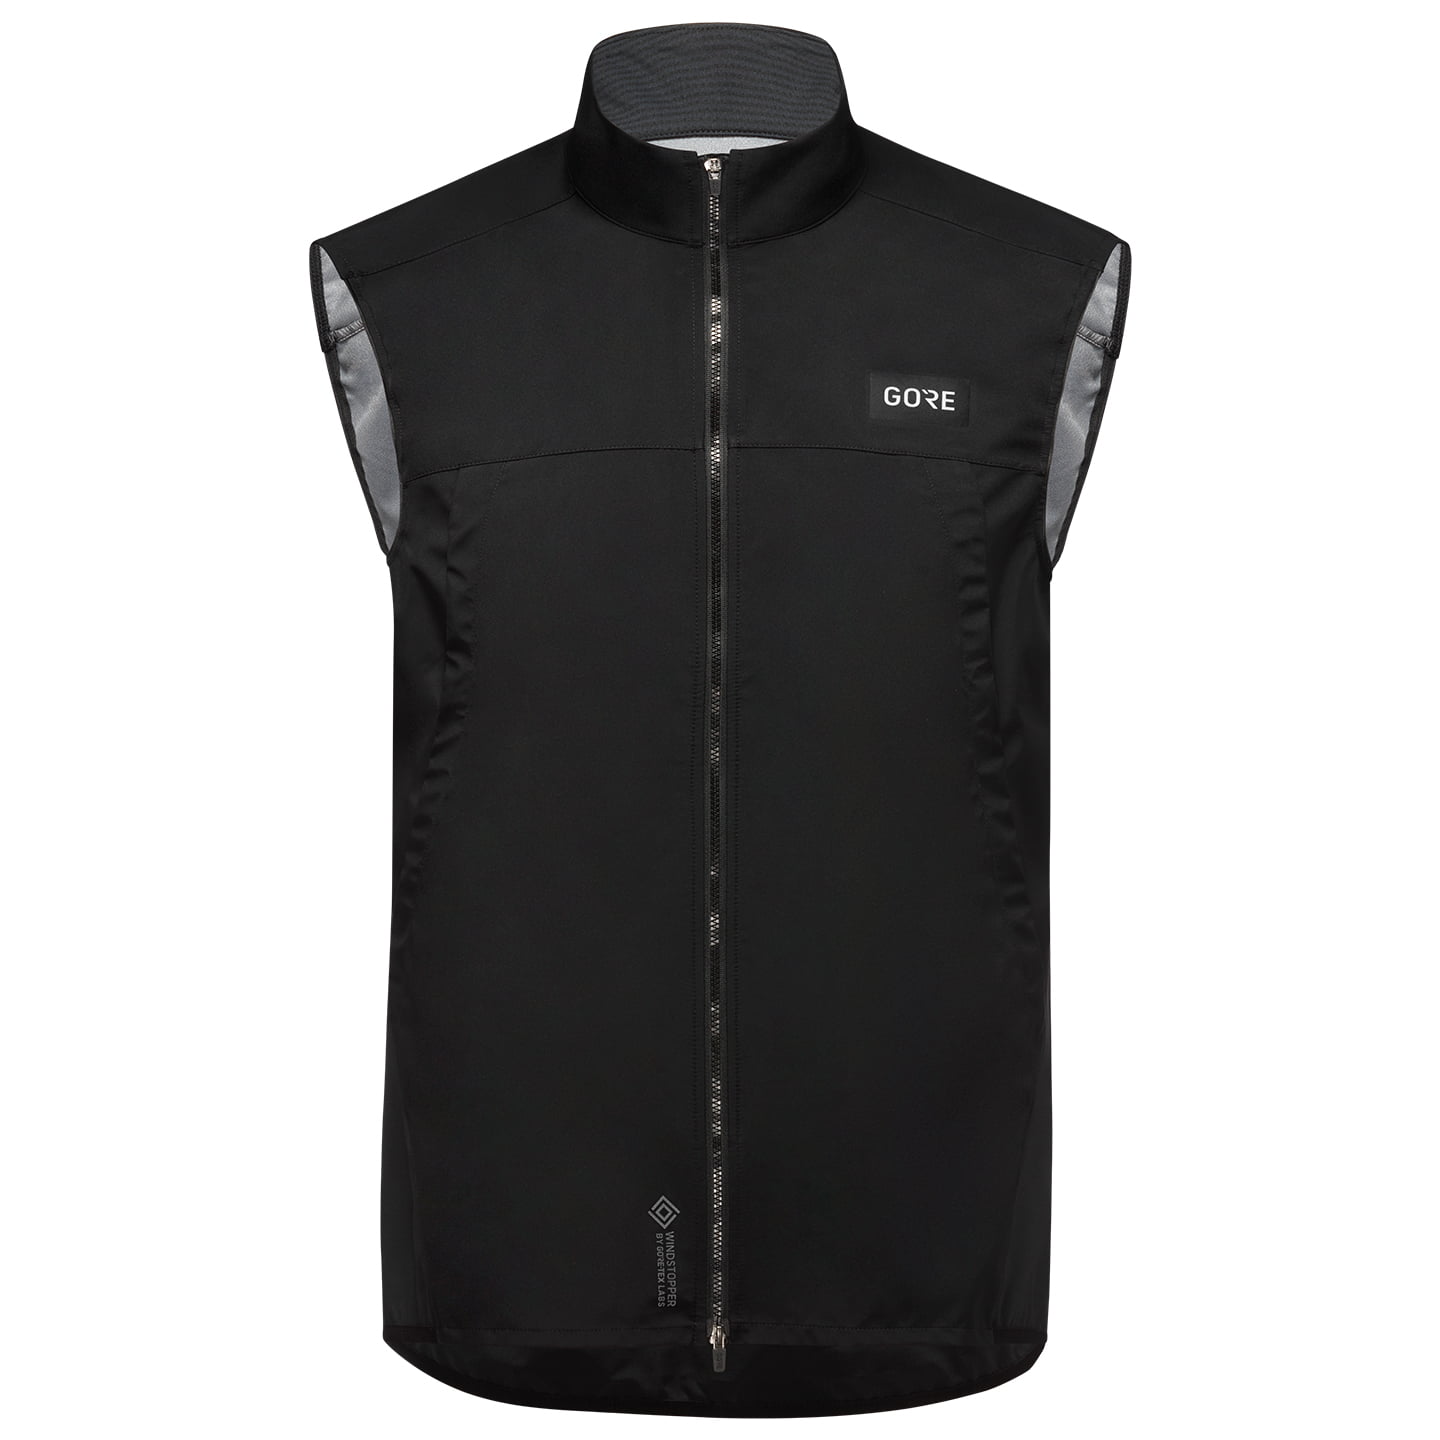 GORE WEAR Cycling vest Everyday Mens, for men, size M, Cycling vest, Cycle clothing